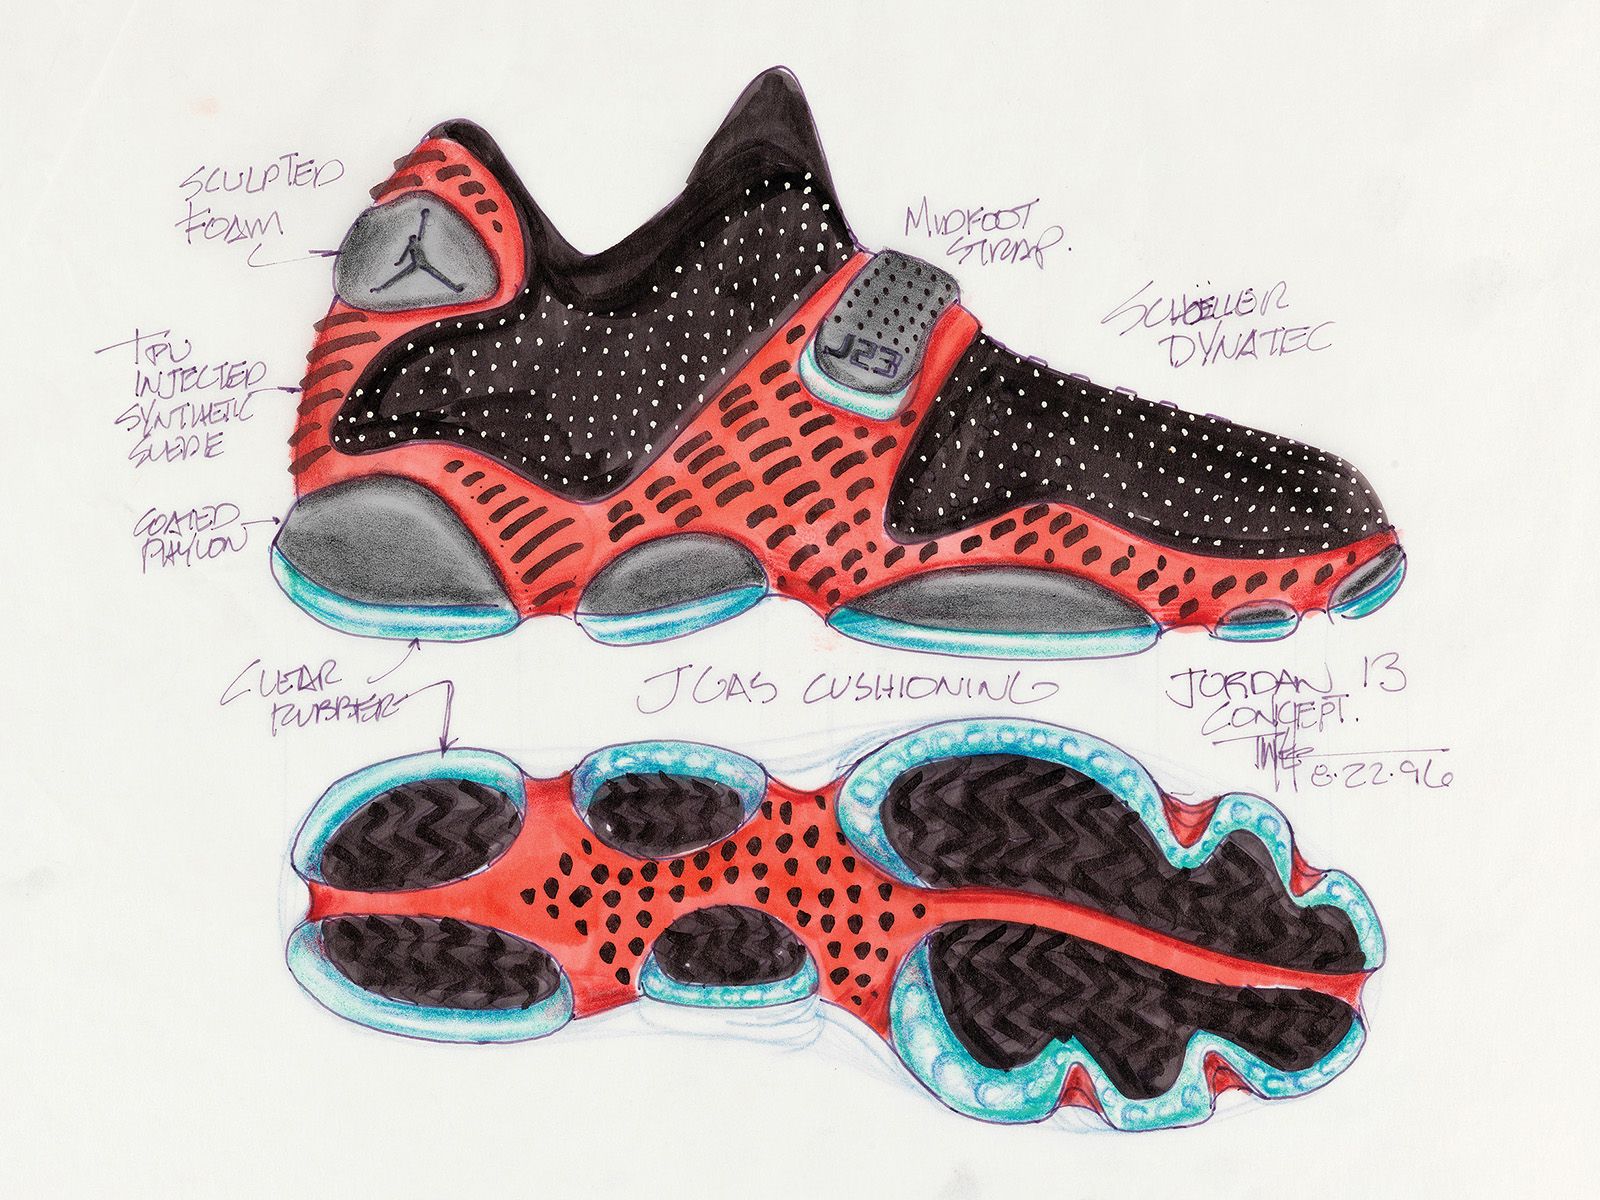 How Sneakers Started Fetching Art-Like Prices